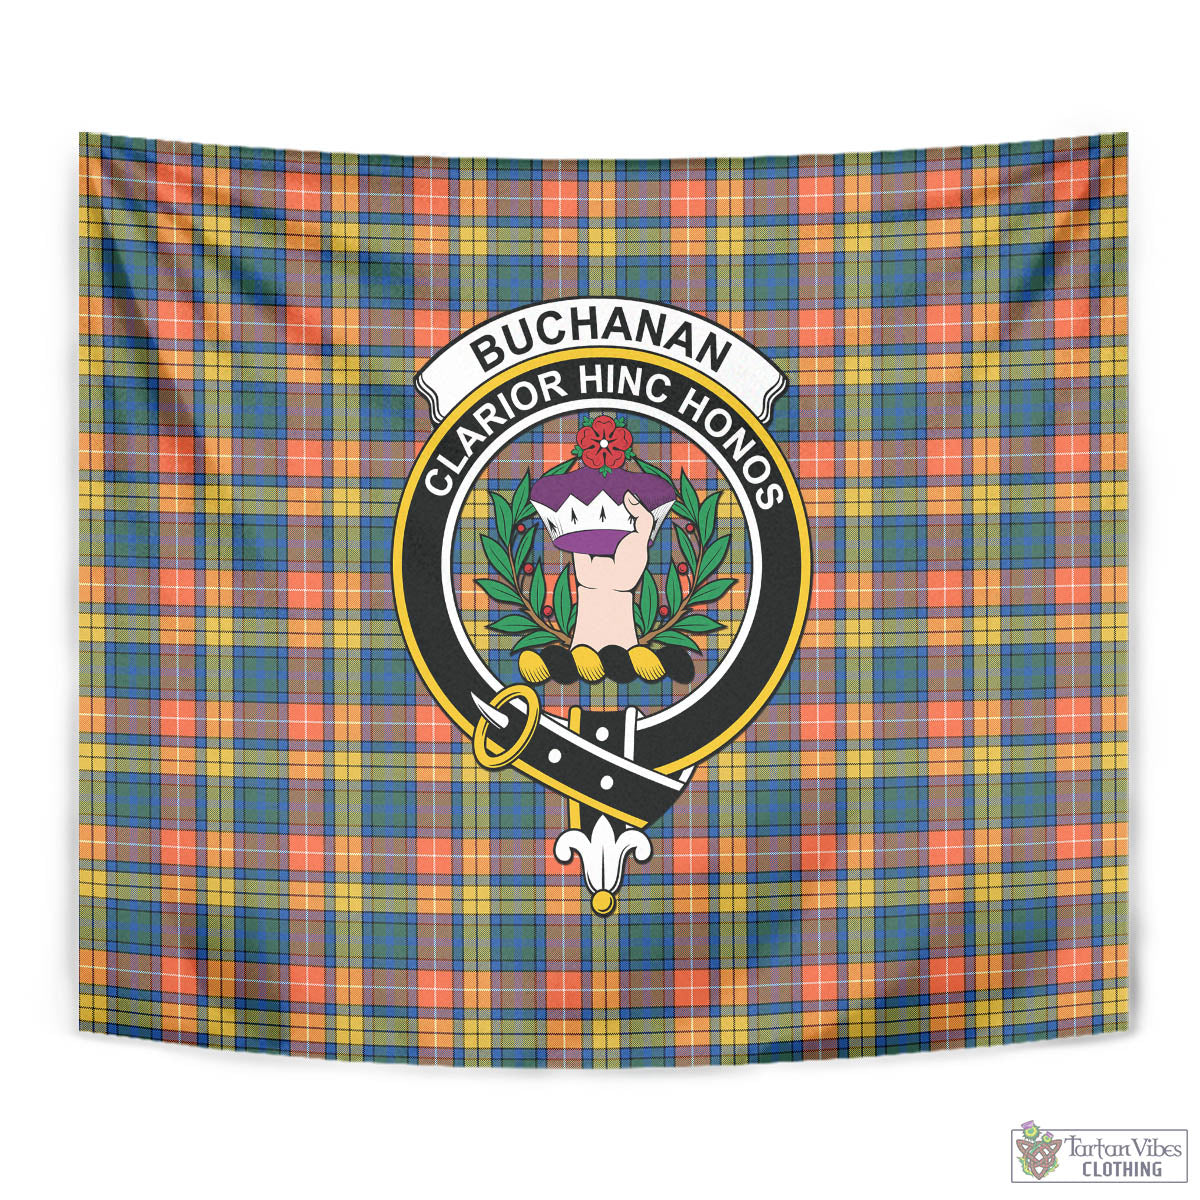 Tartan Vibes Clothing Buchanan Ancient Tartan Tapestry Wall Hanging and Home Decor for Room with Family Crest